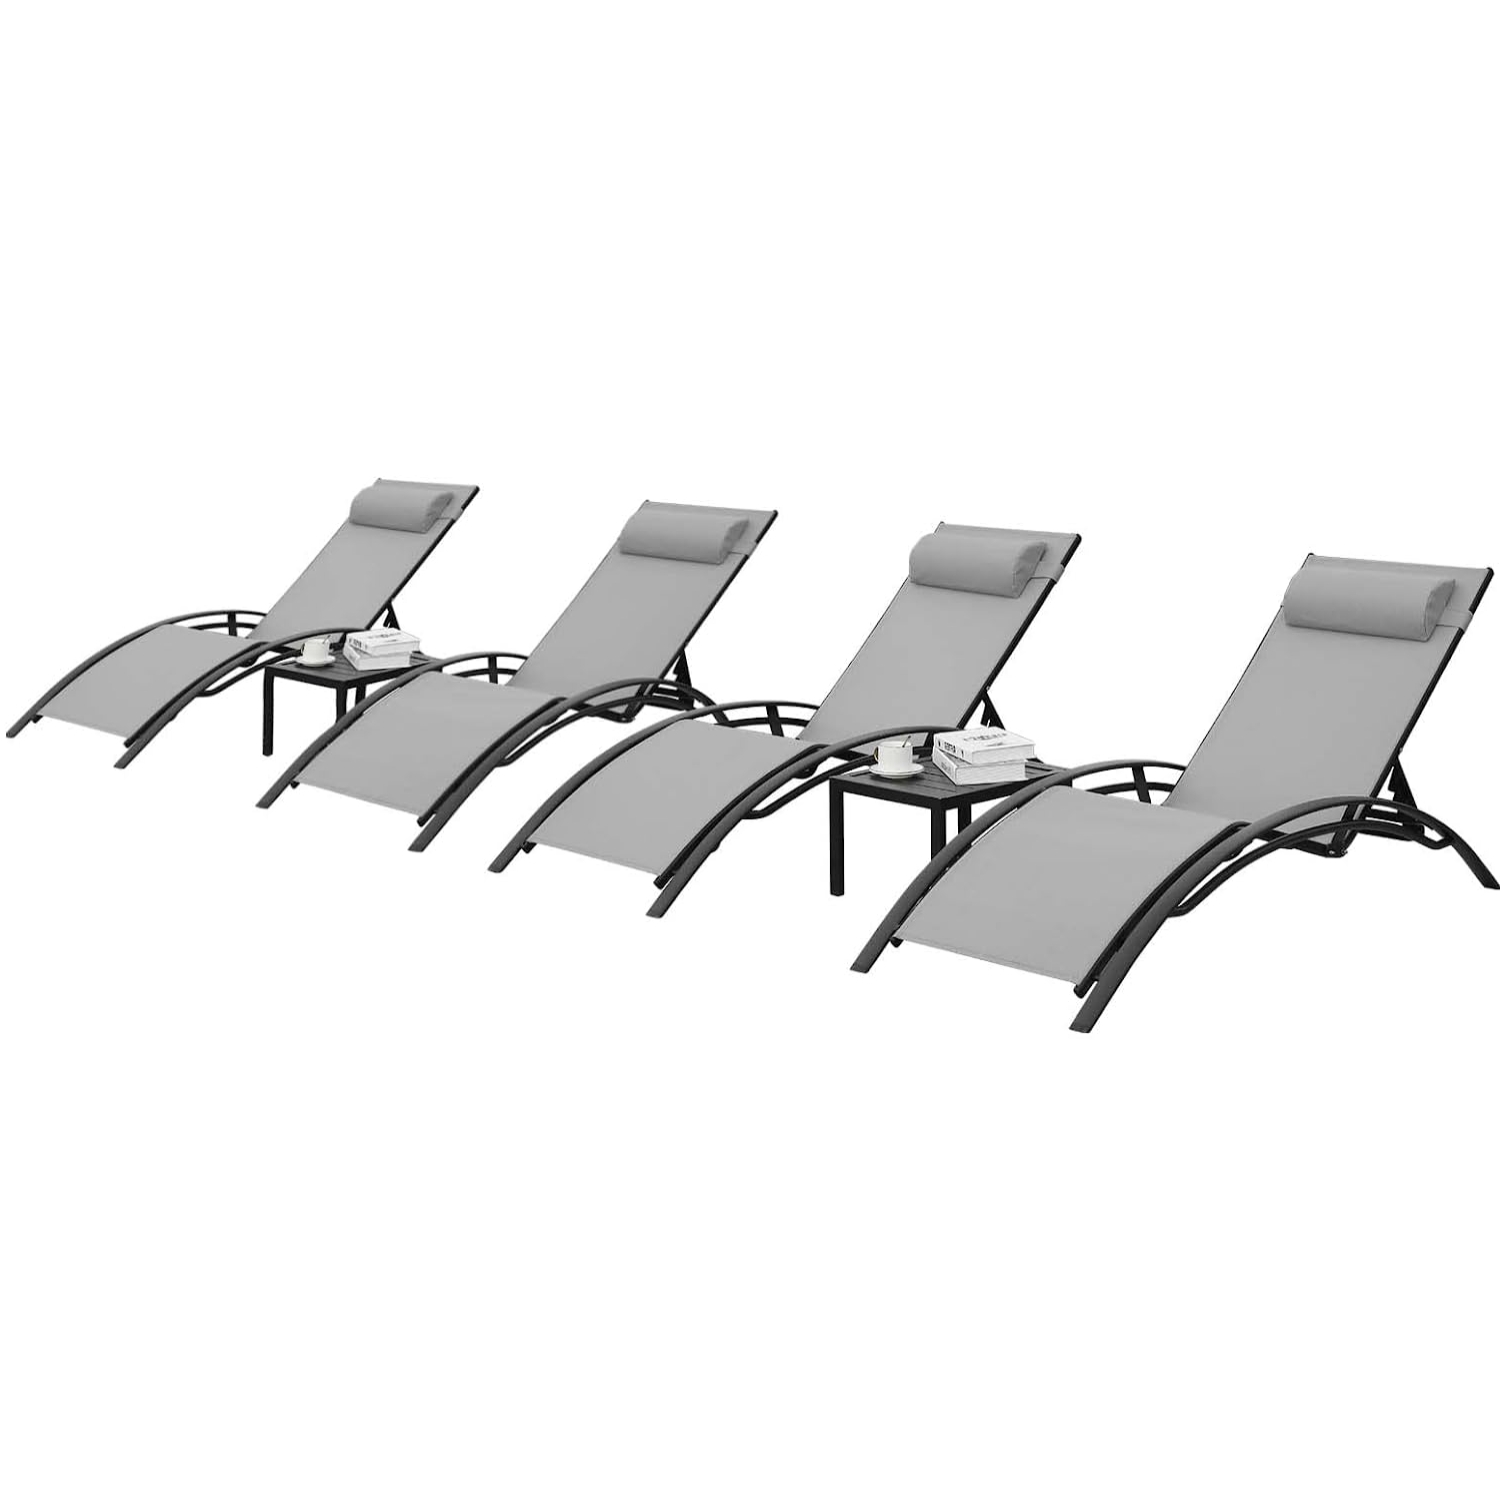 Pirecart Set of 6 Patio Lounge Chair Weather Resistant Adjustable Poolside Lounger Recliner - image 1 of 7